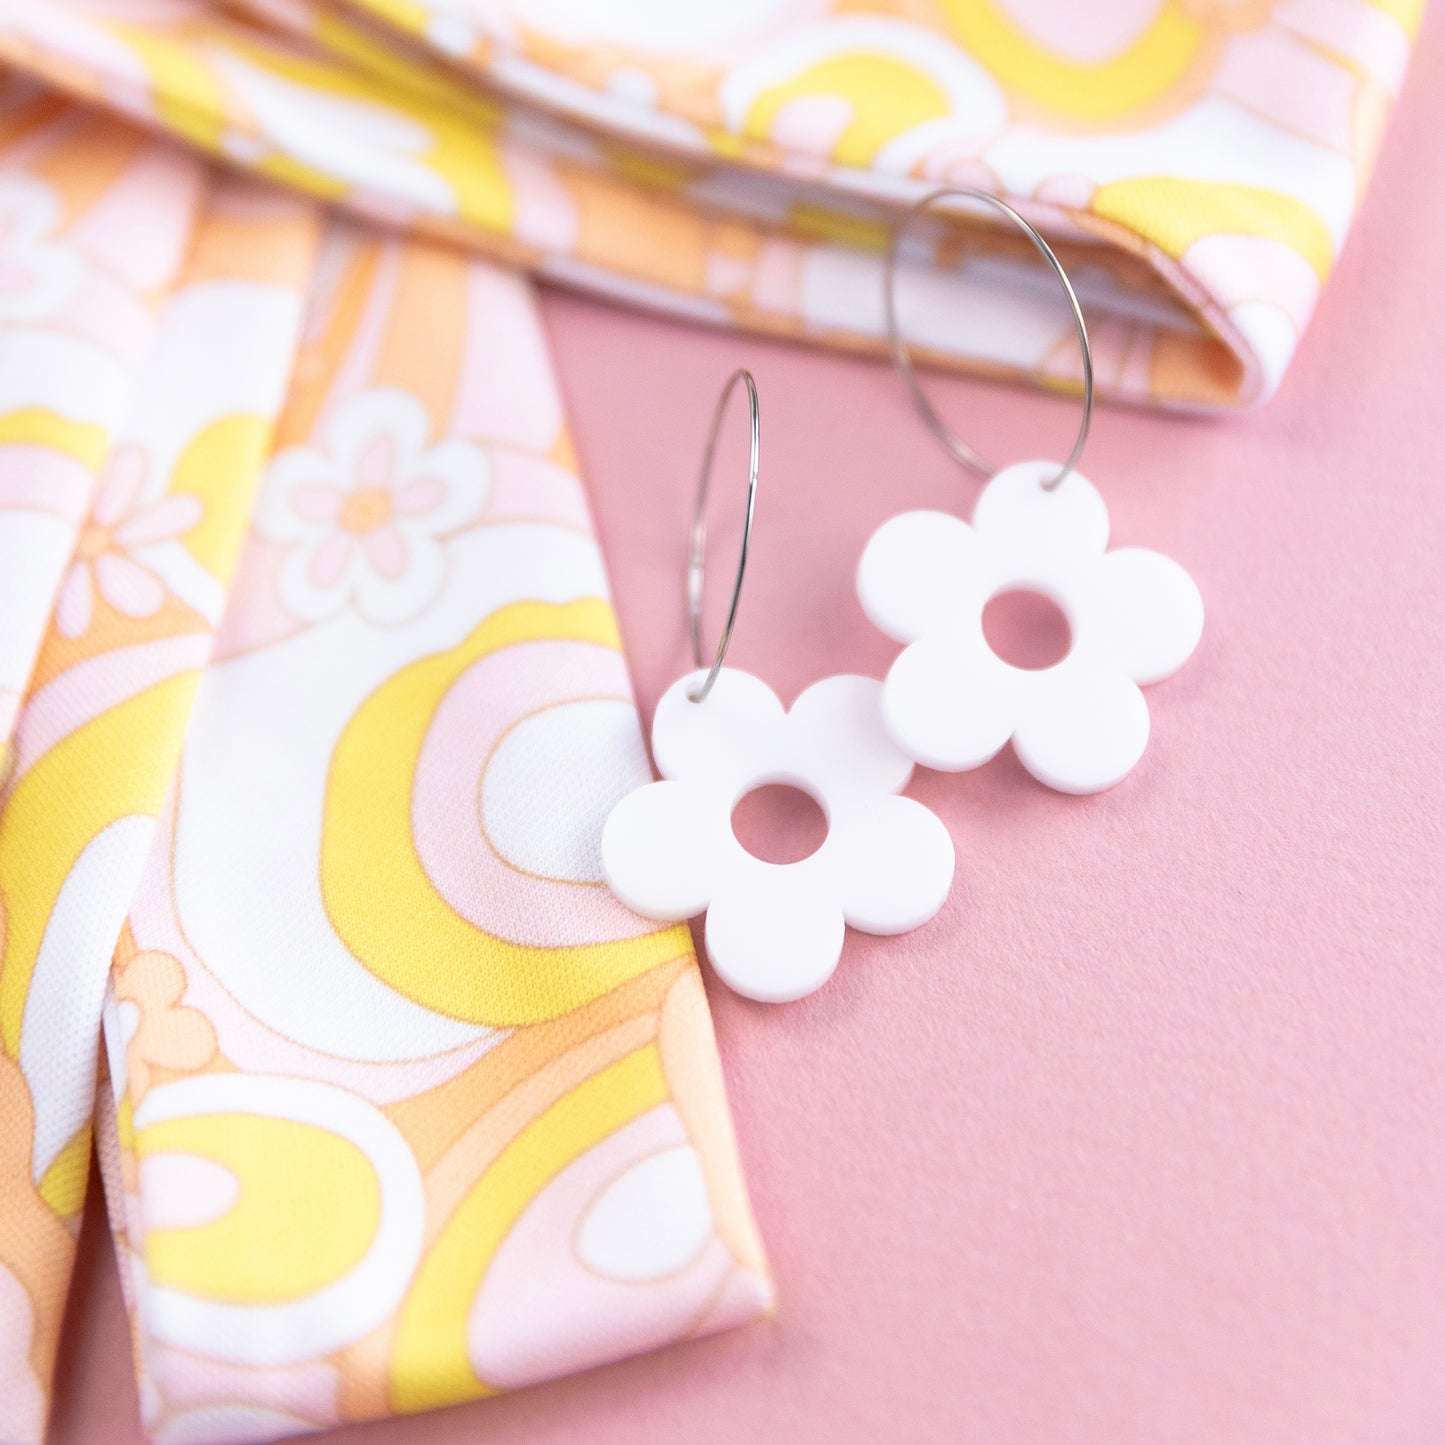 THE BEST EARRINGS/HEADBAND in Daisy Paisley + White Daisy Hoops/ Statement Accessories